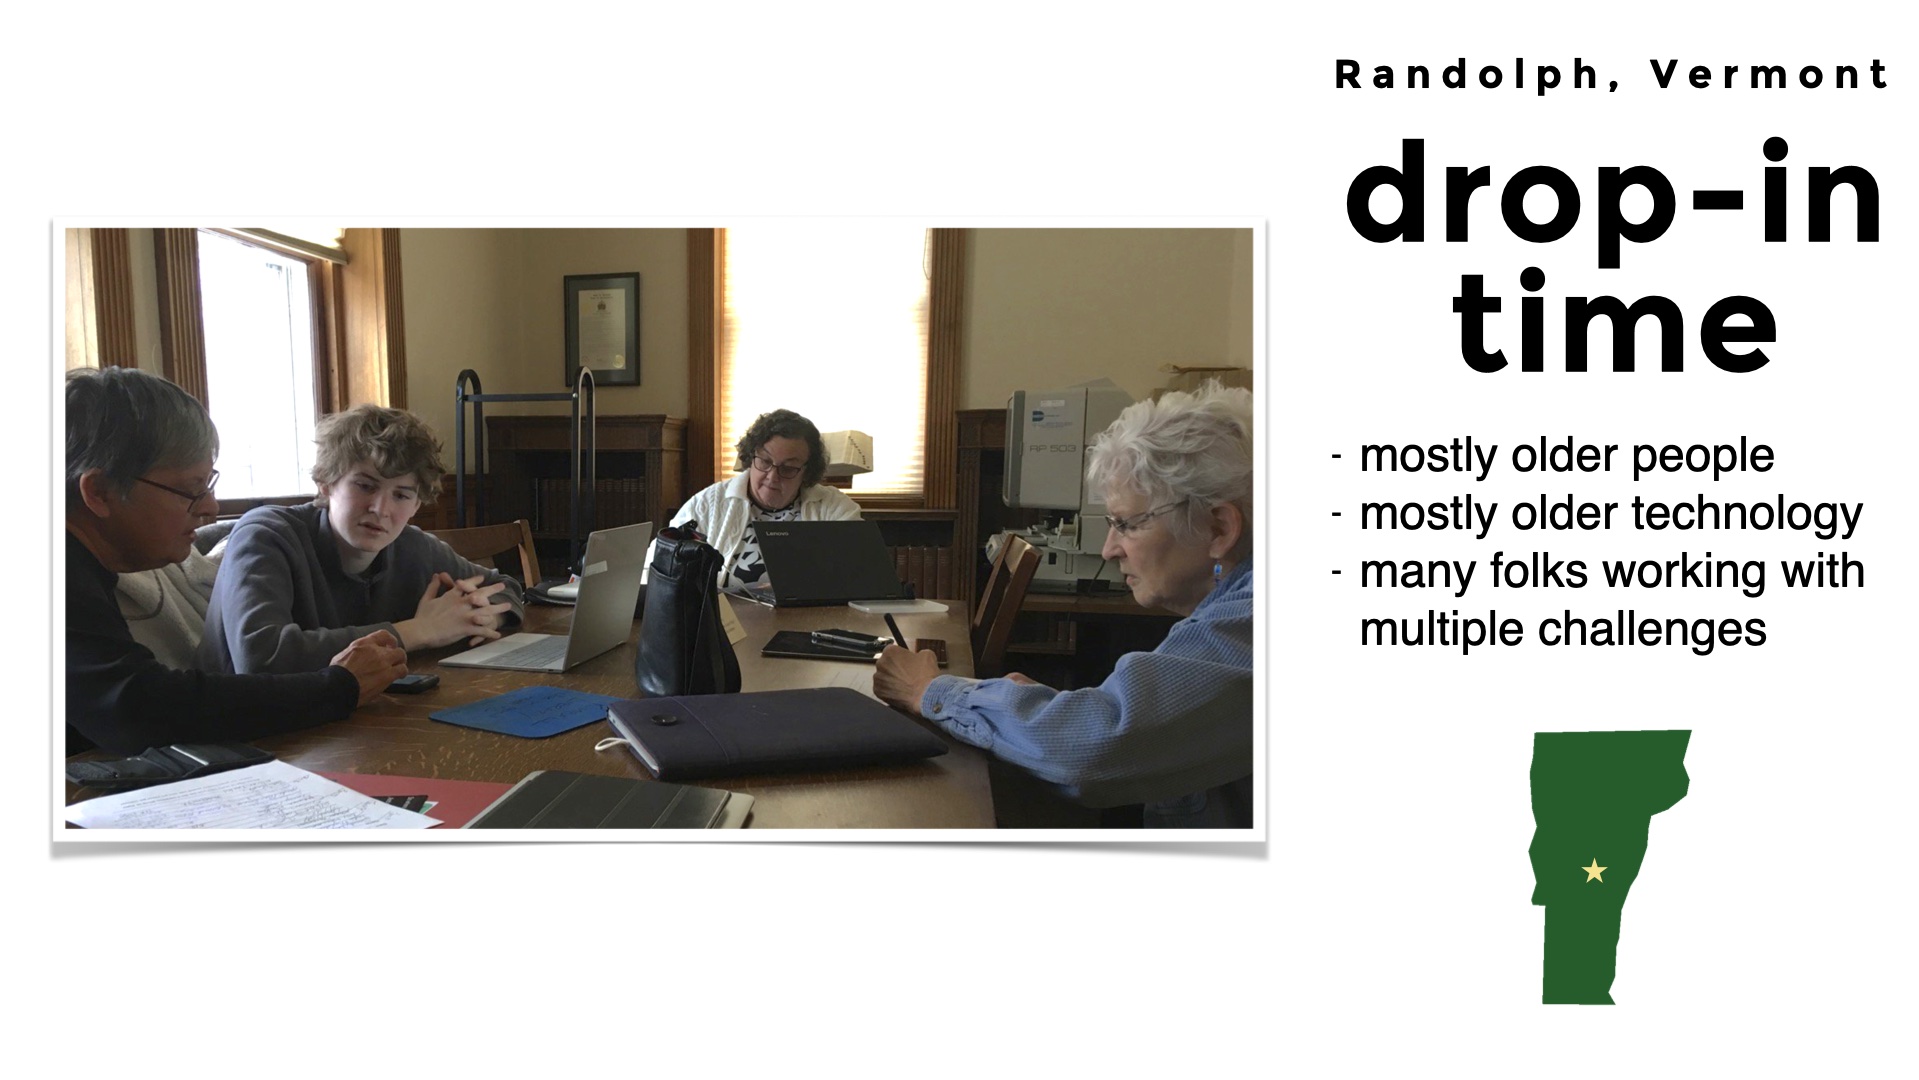 Picture of people sitting around a table in a library. Headline: Randolph Vermont drop-in time. Bulleted list: - mostly older people
- many folks working with multiple challenges